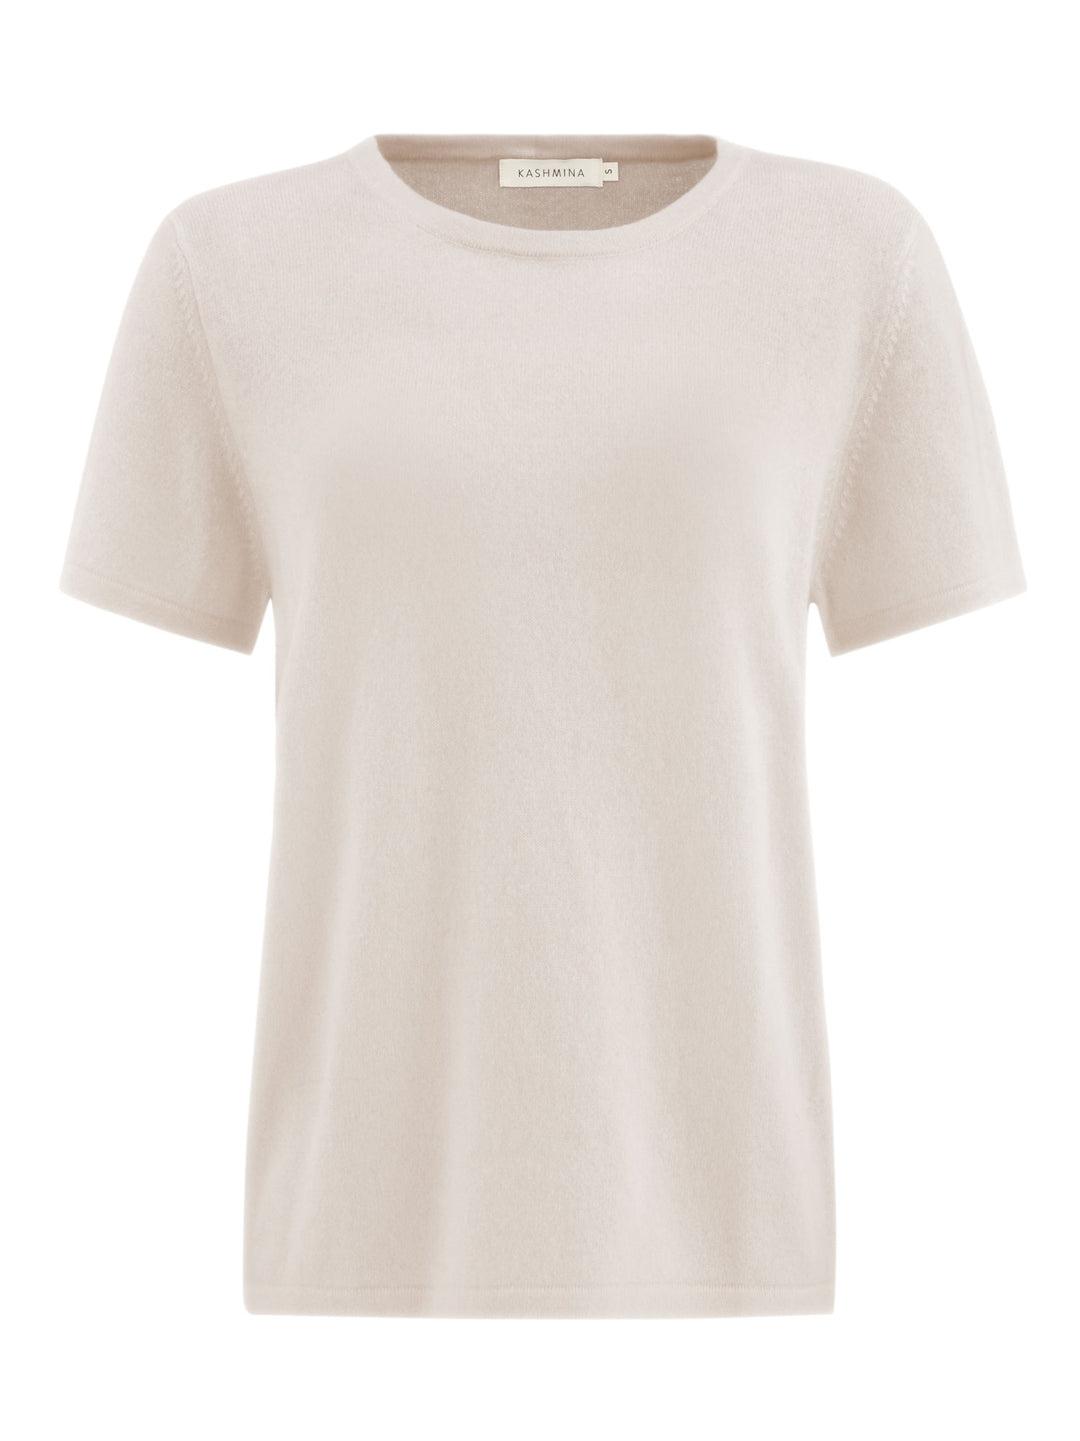 cashmere t-shirt in 100% cashmere by Kashmina. Color: Pearl.